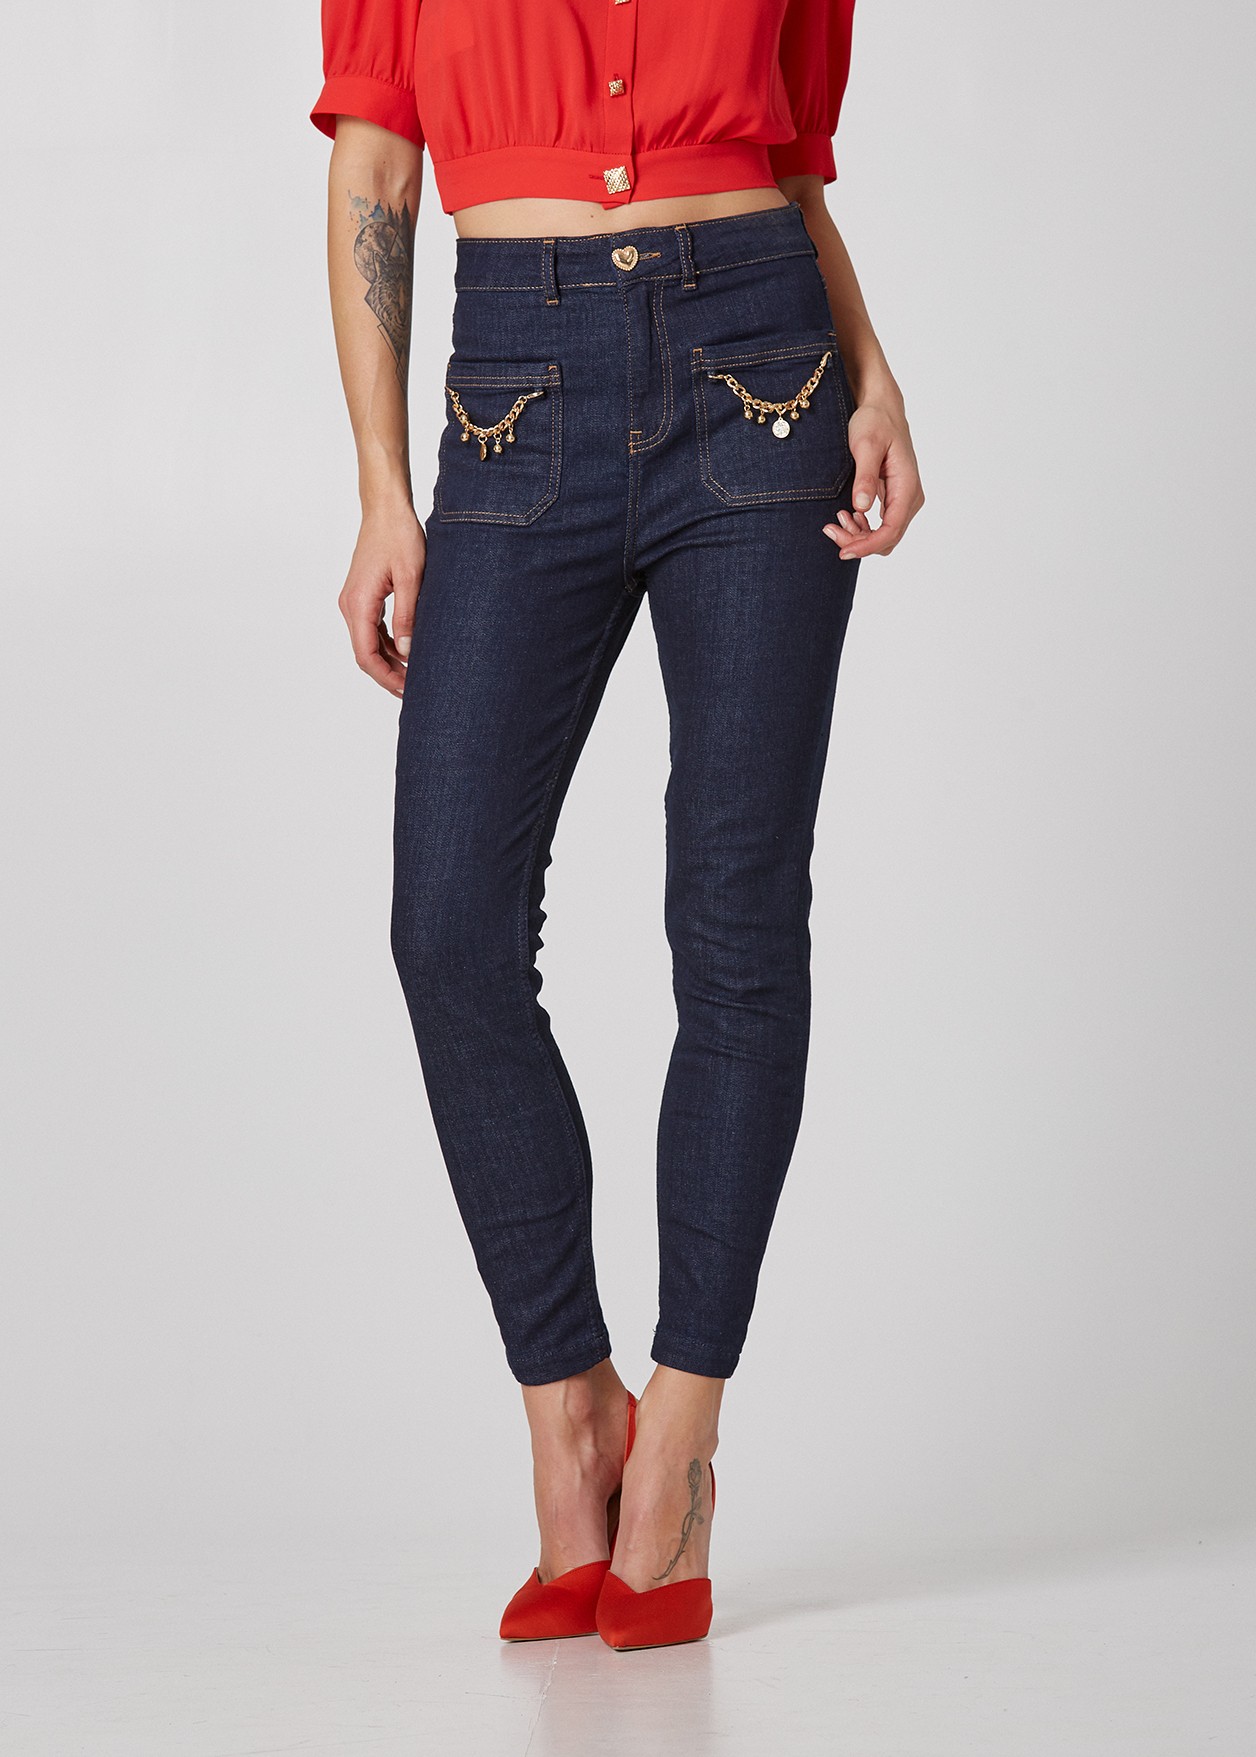 Jeans with decorative chains